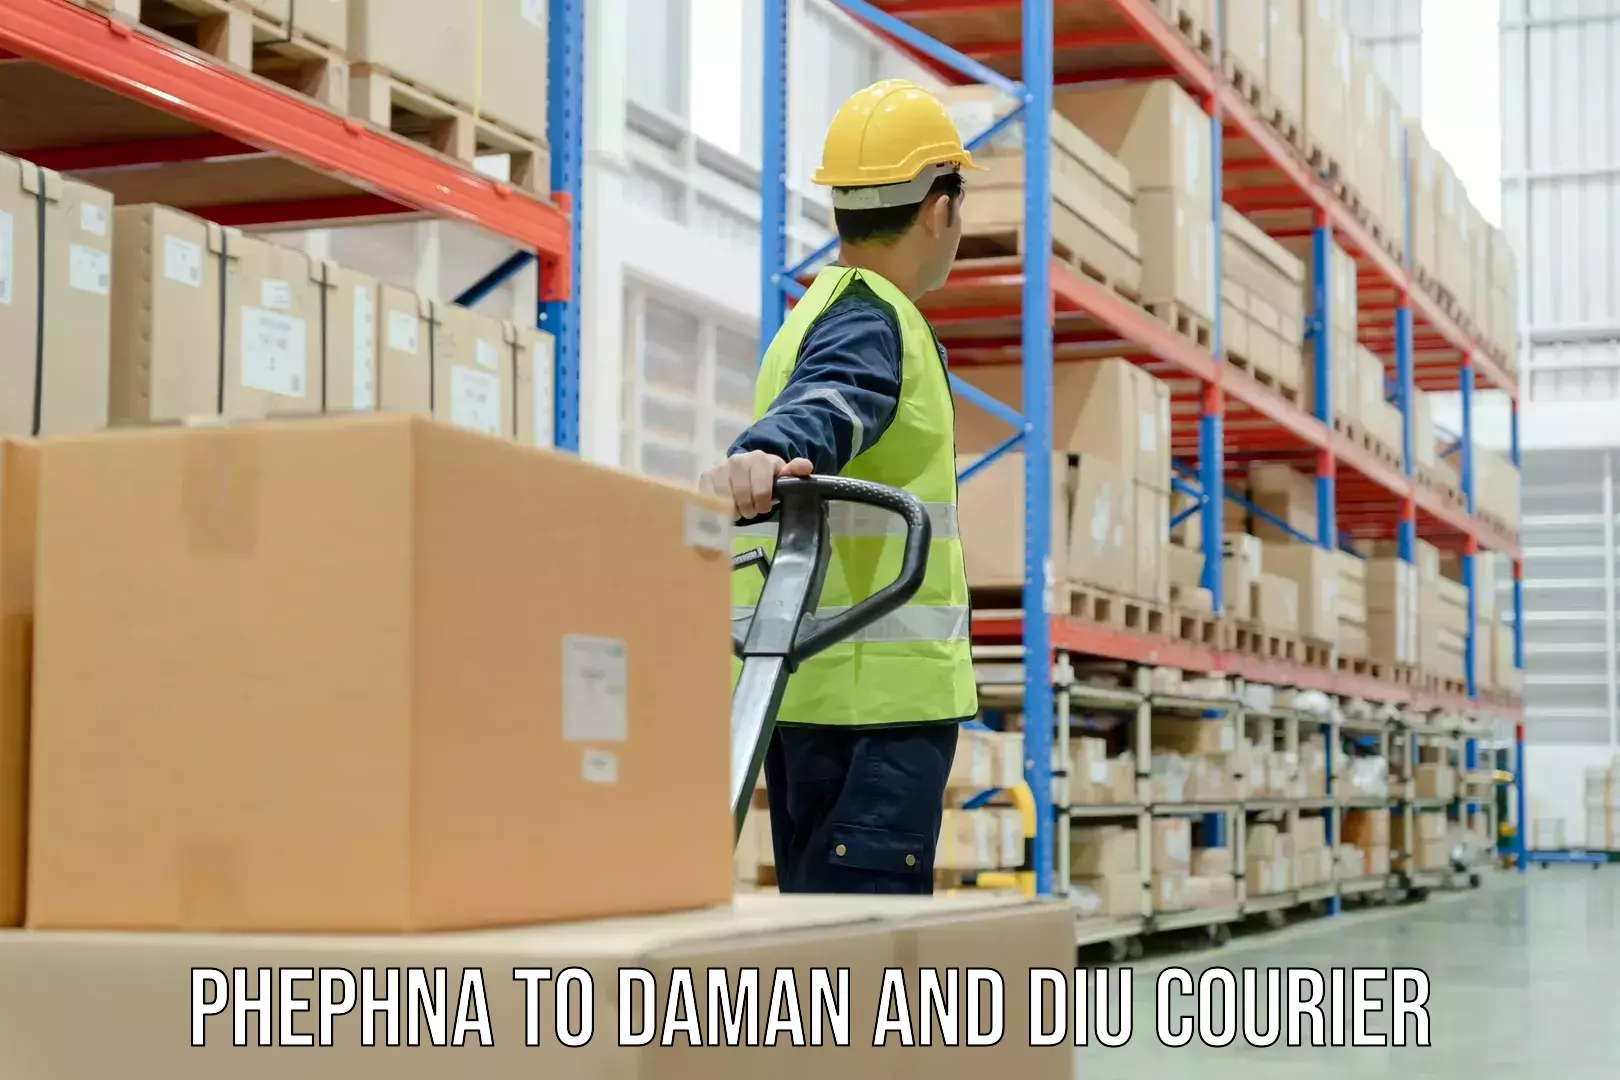 24-hour delivery options Phephna to Diu